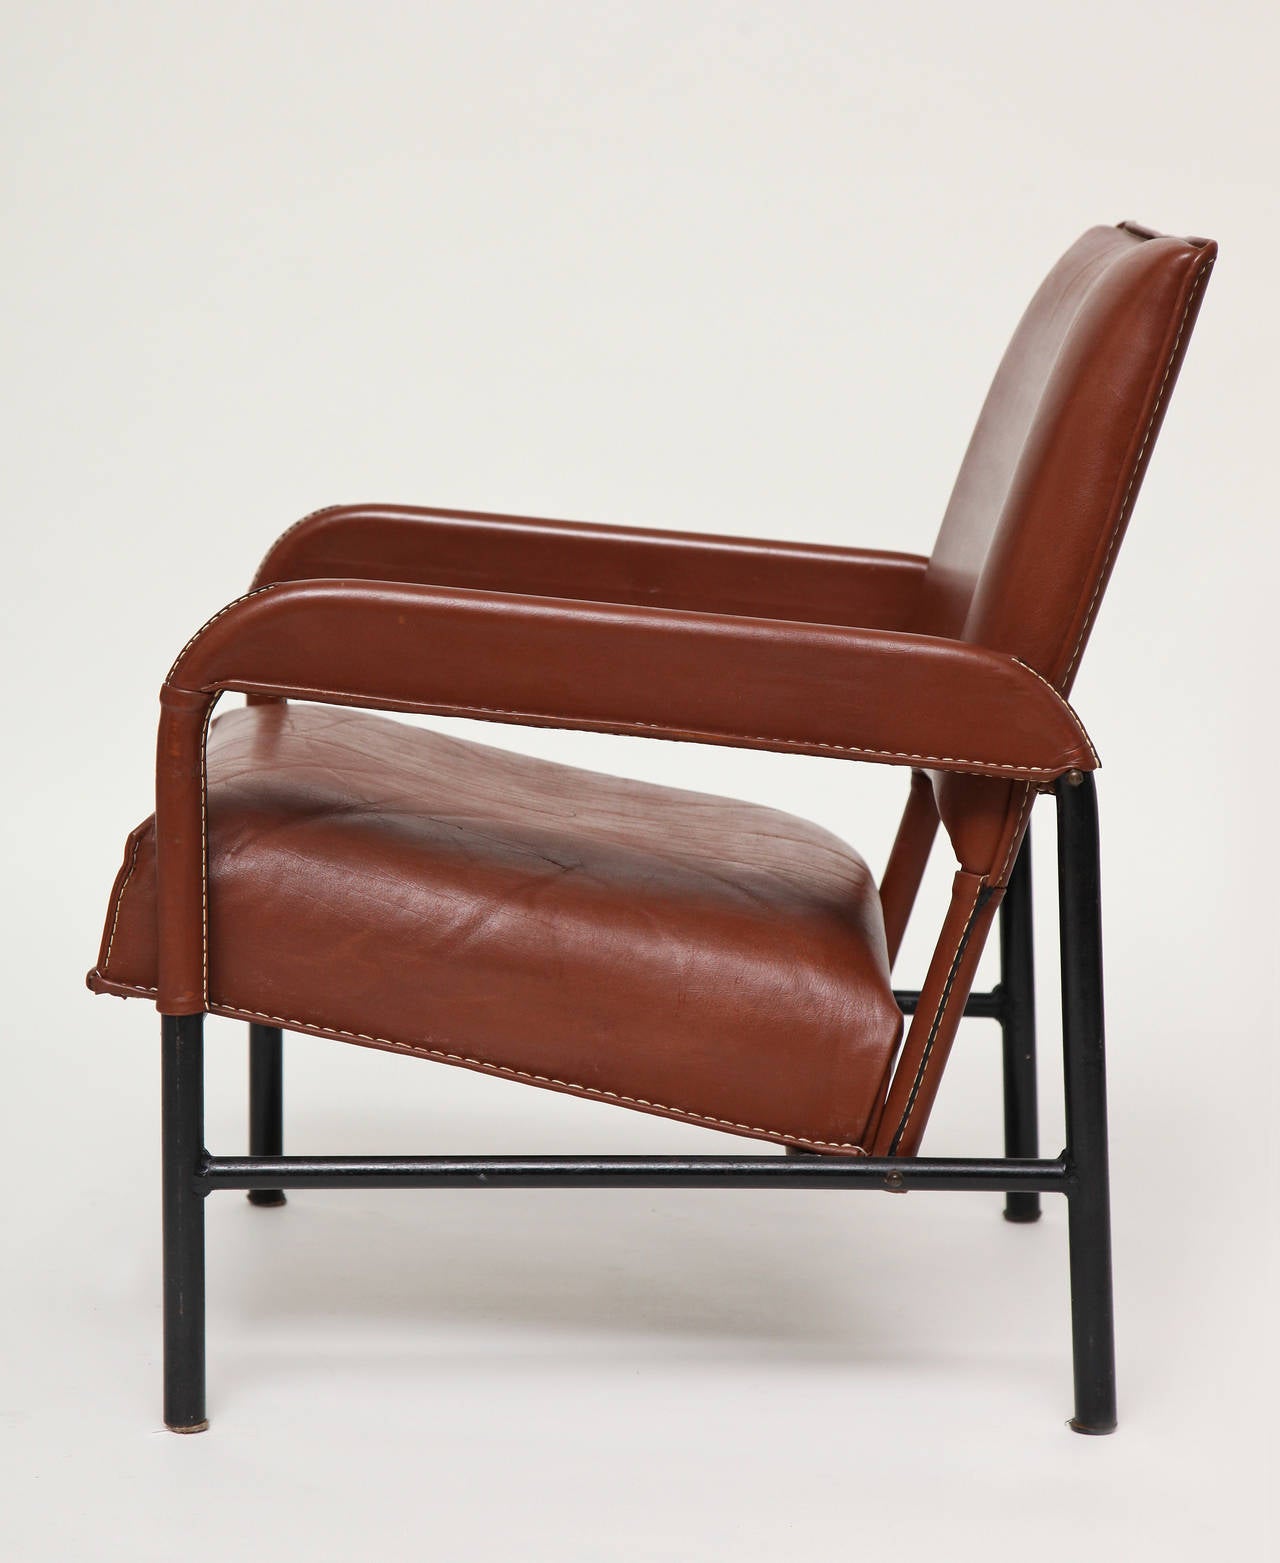 French Set of Three Leather Armchairs, France, C. 1955